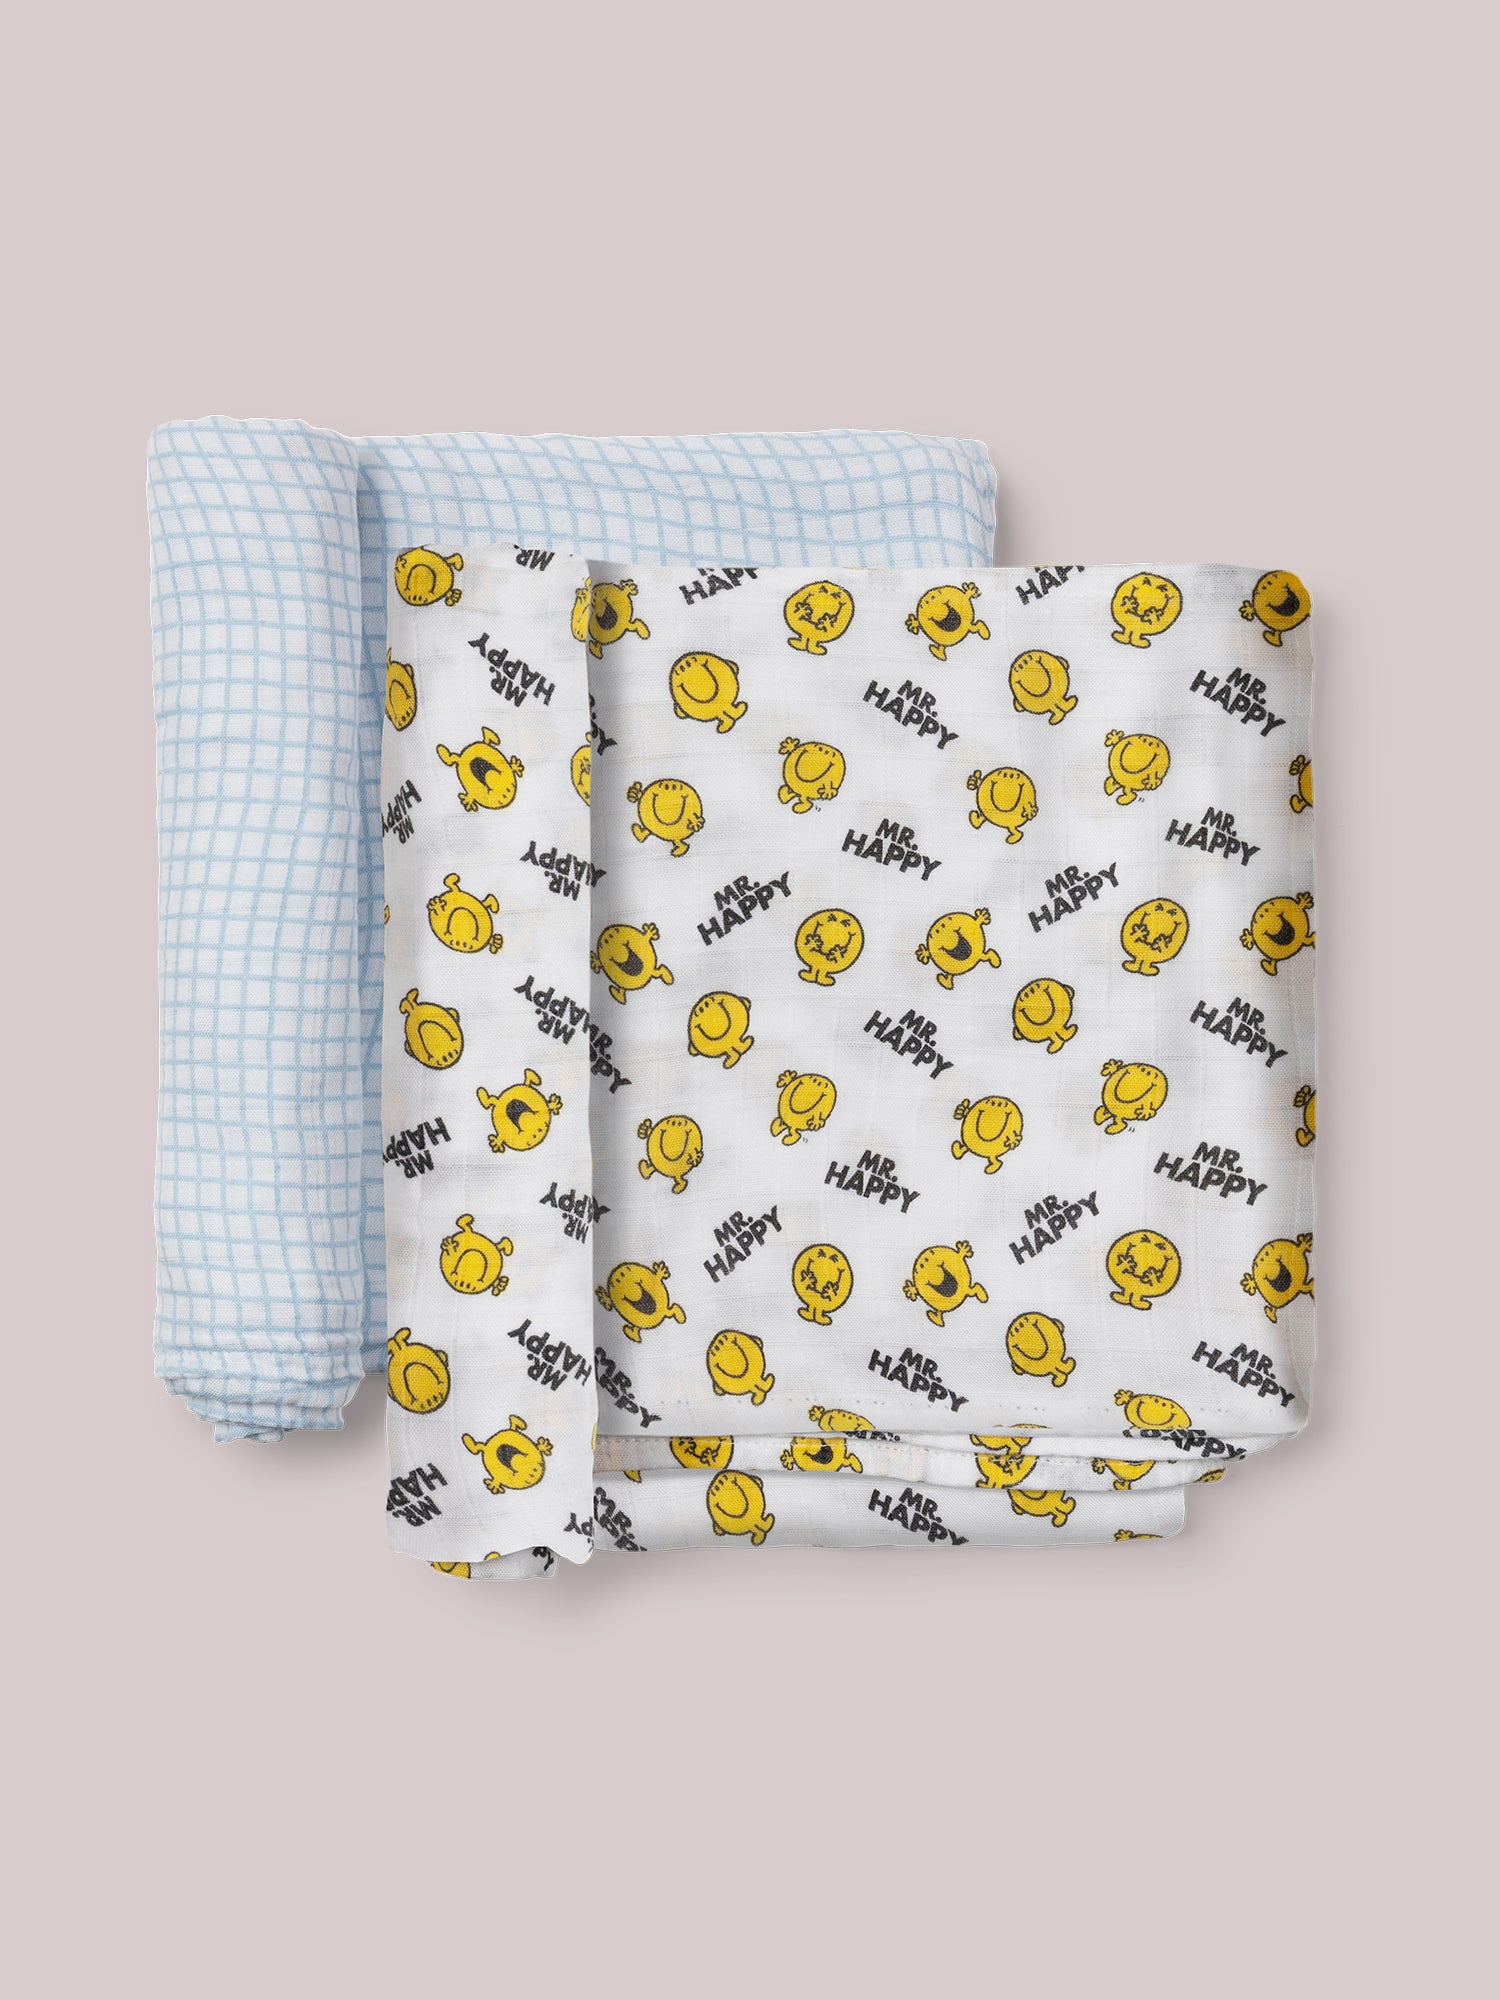 Mr. Happy Swaddle Blanket set of two with rolled up edges flat lay